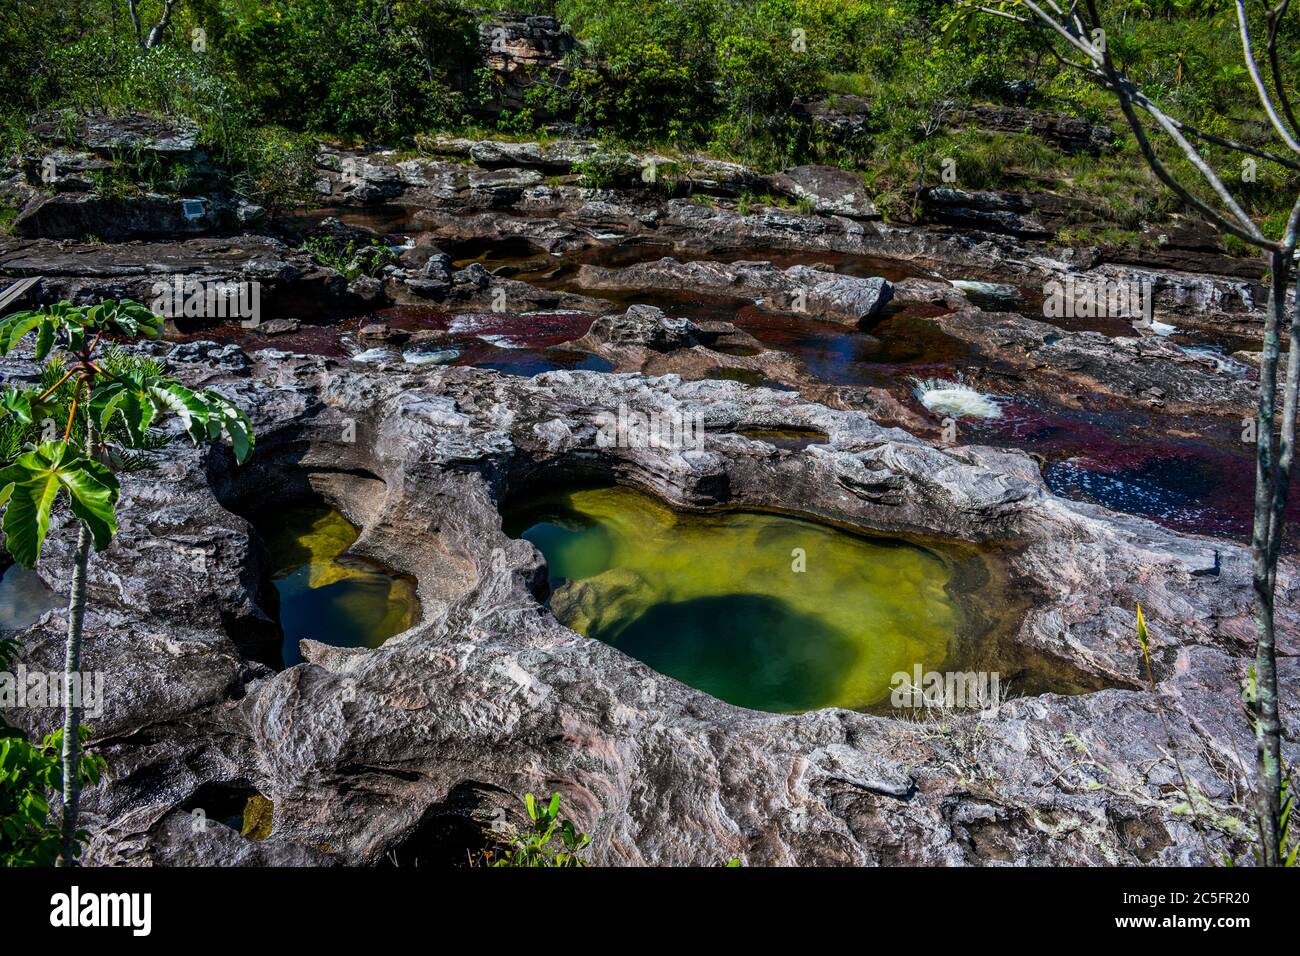 Caño Cristales - Meta Colombia. Different colors of the waters in one of the most beatiful rivers in the World. Stock Photo